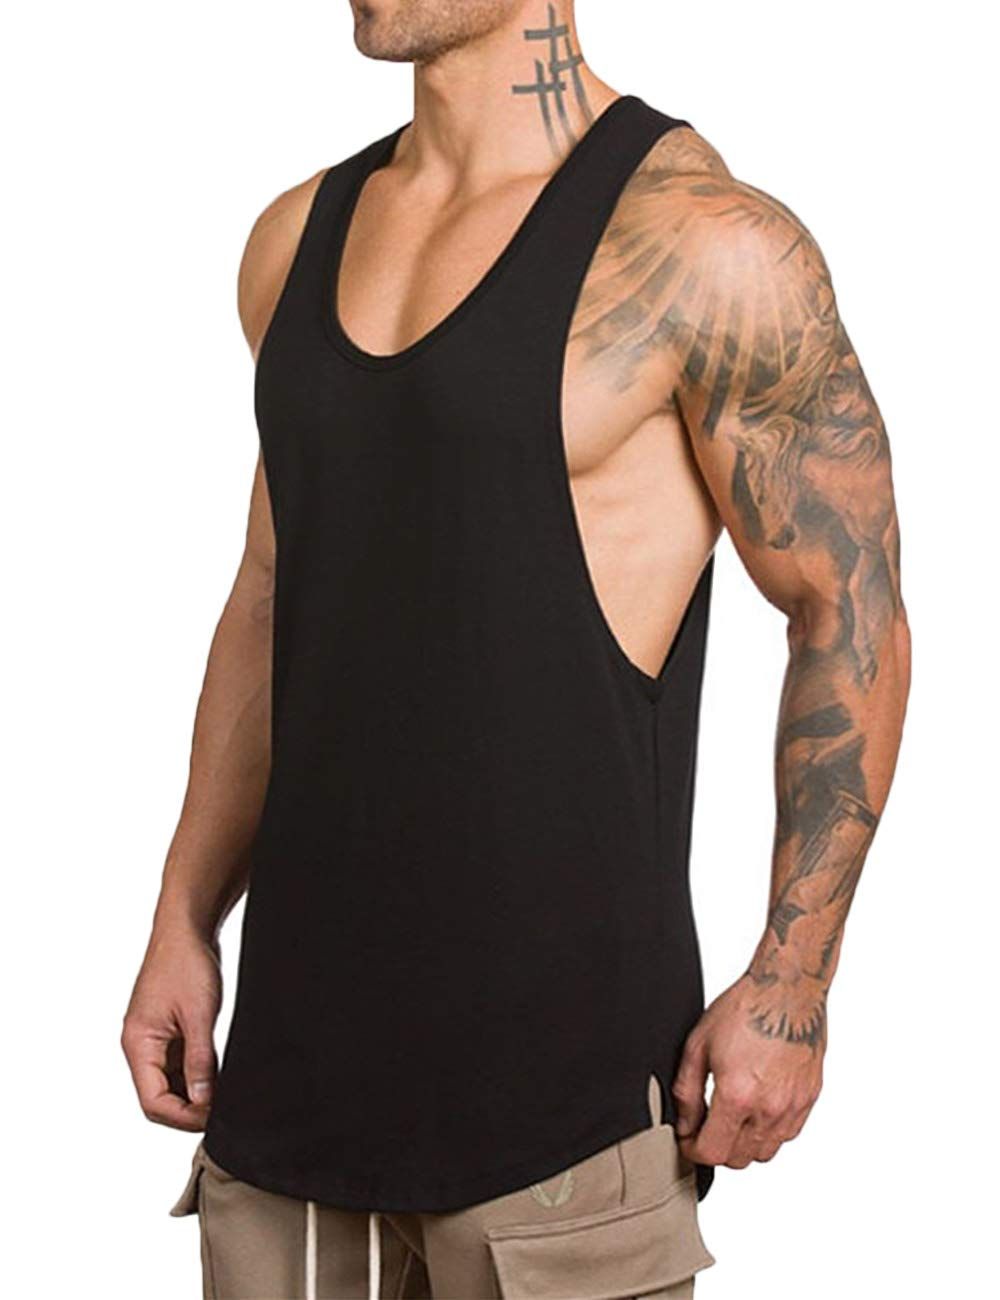 Fitness Fashion: Stay Active in Gym Vests for Men